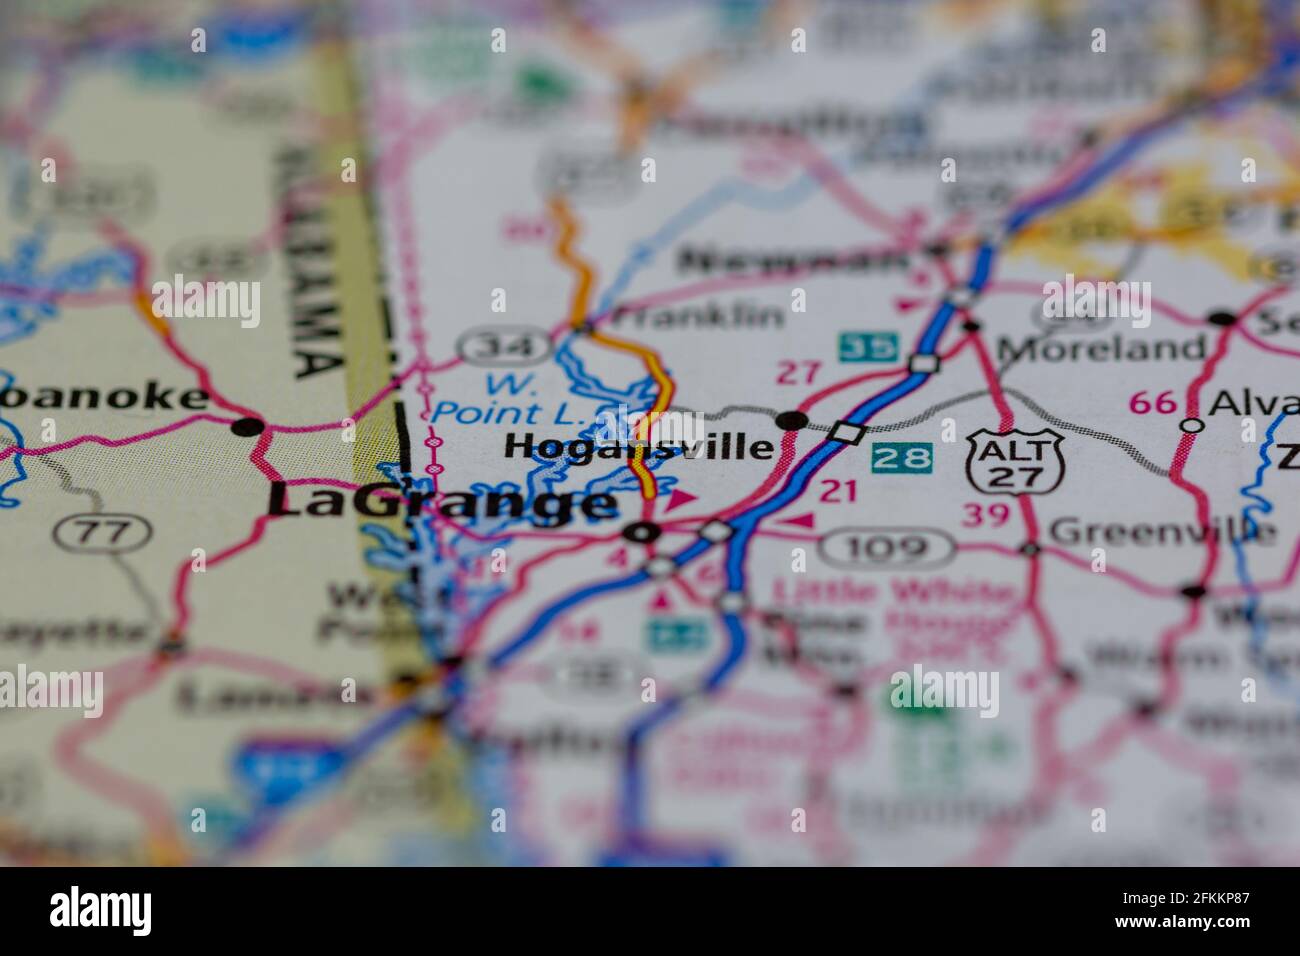 Hogansville Georgia USA Shown on a Geography map or road map Stock Photo